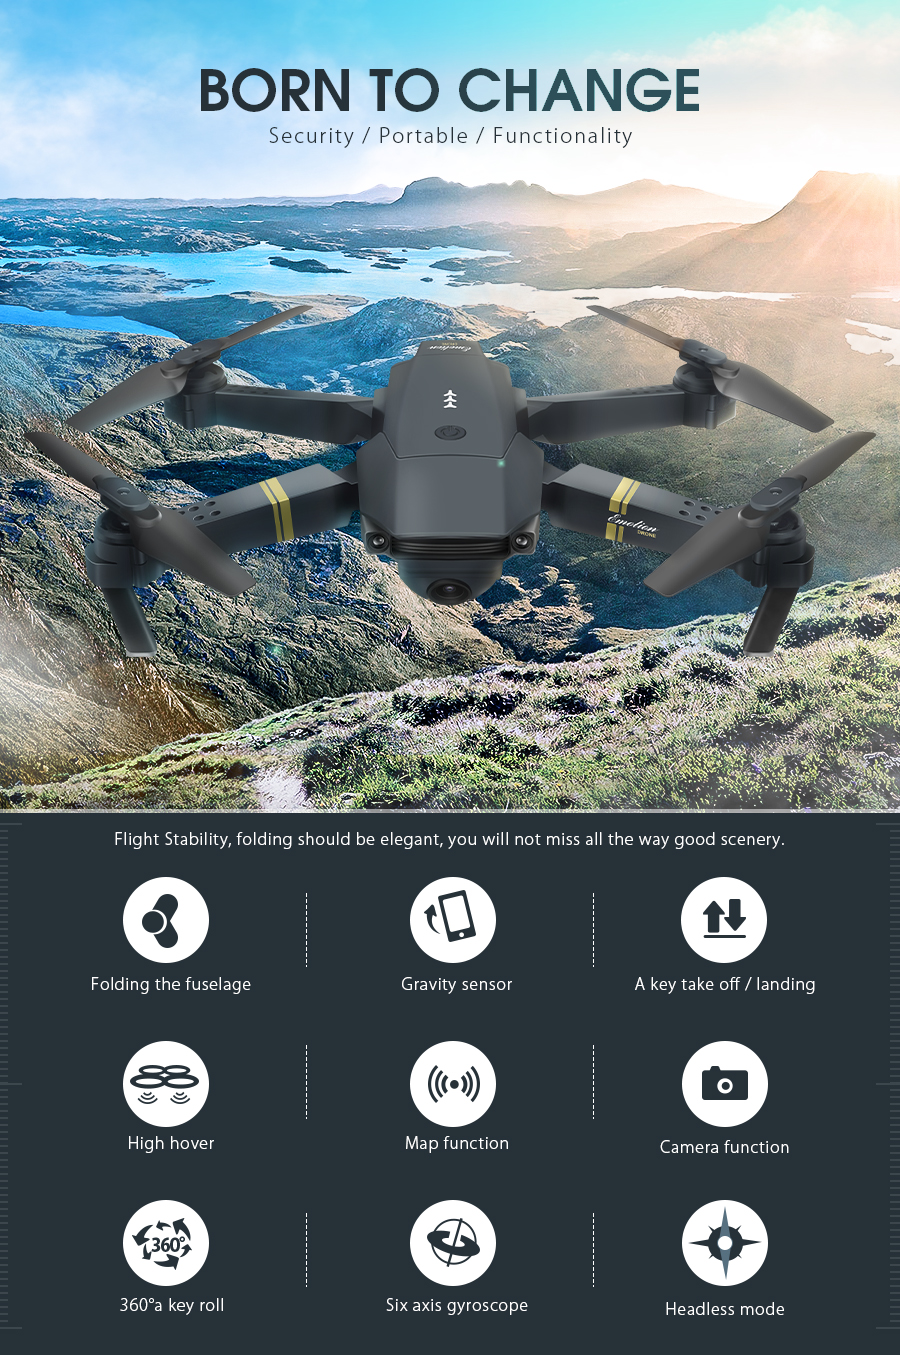 Eachine-E58-WIFI-FPV-With-720P1080P-HD-Wide-Angle-Camera-High-Hold-Mode-Foldable-RC-Drone-Quadcopter-1212232-1